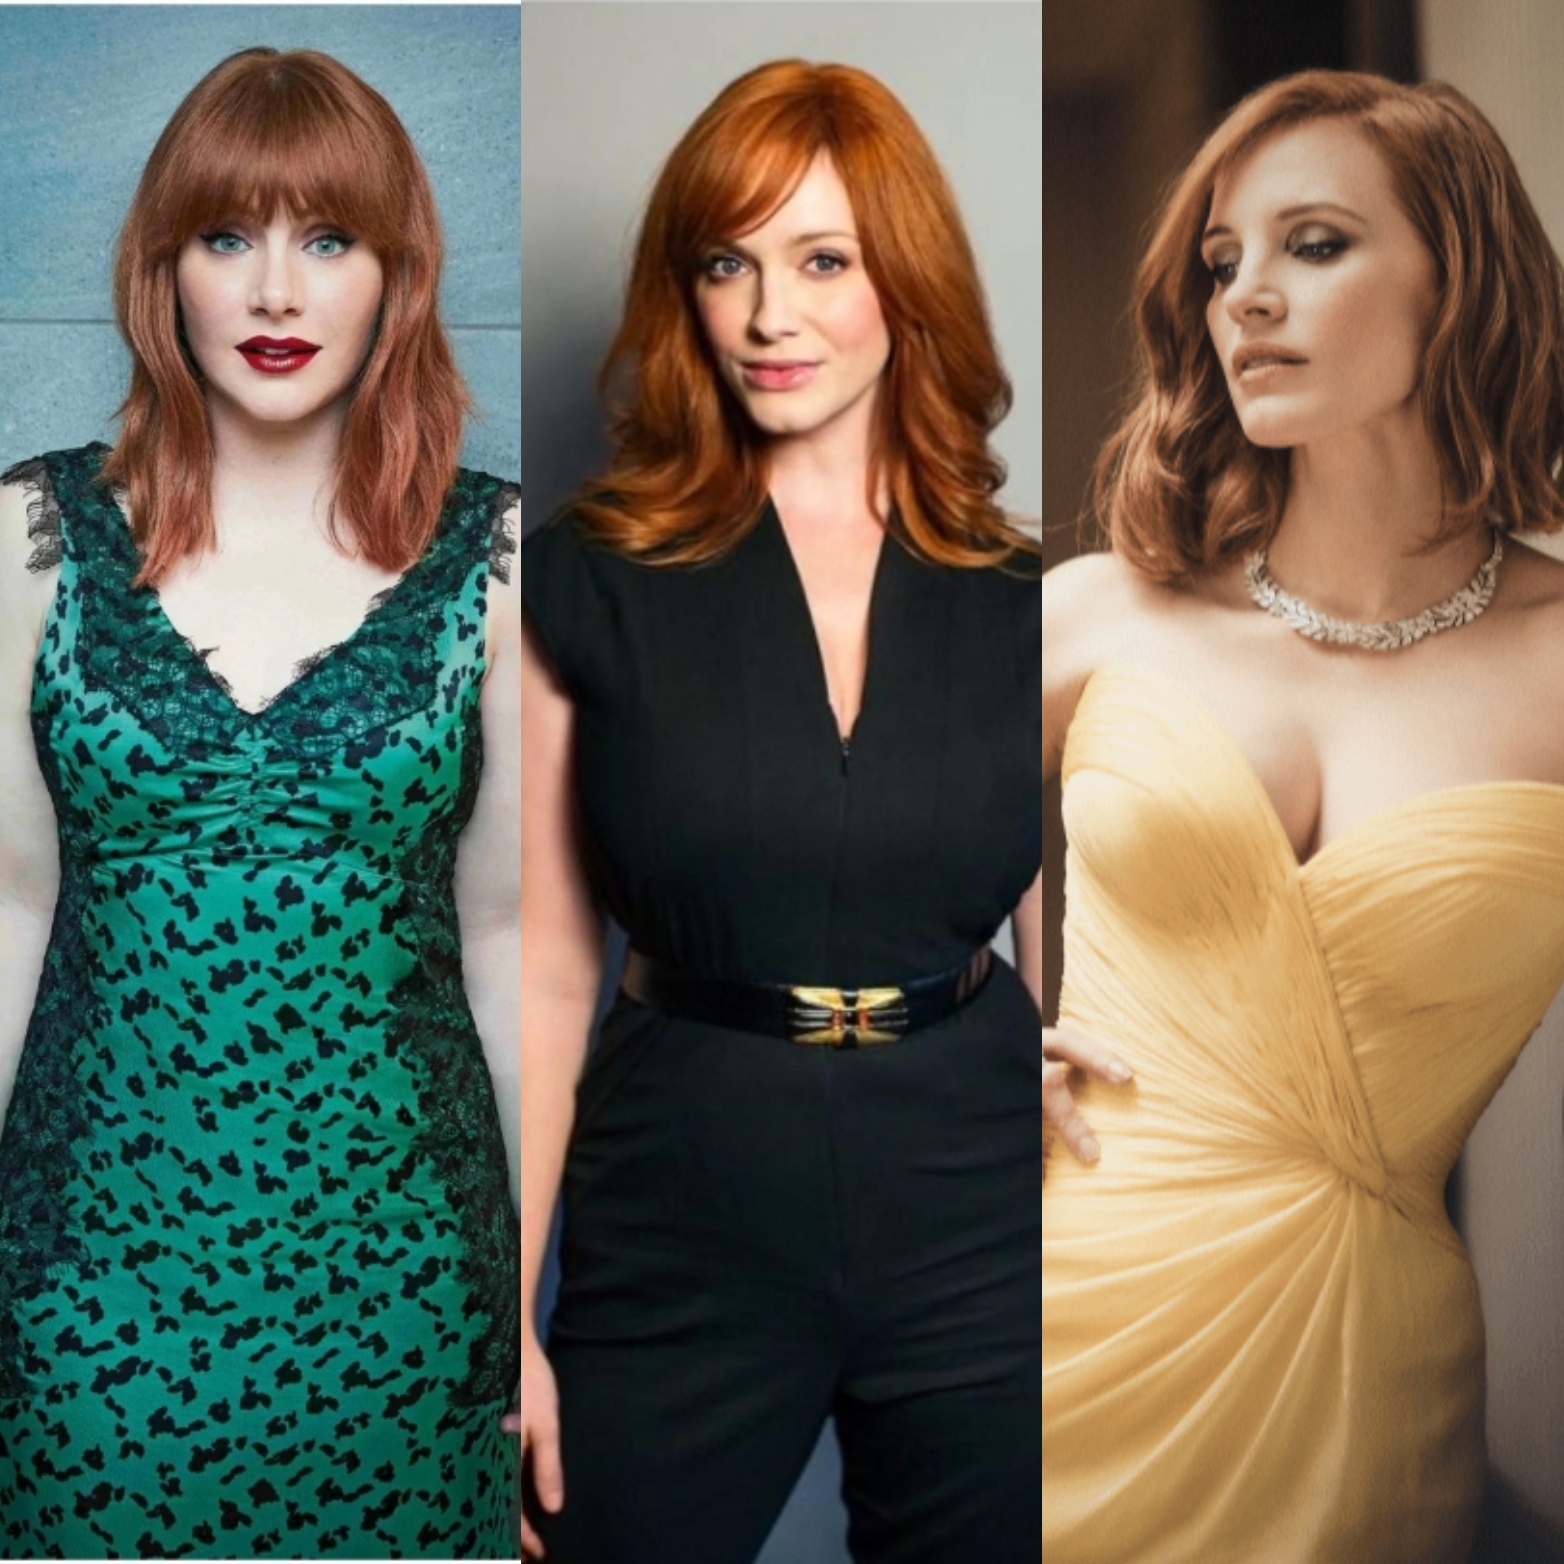 Bryce Dallas Howard Christina Hendricks And Jessica Chastain Would Be A Dream 4some Scrolller